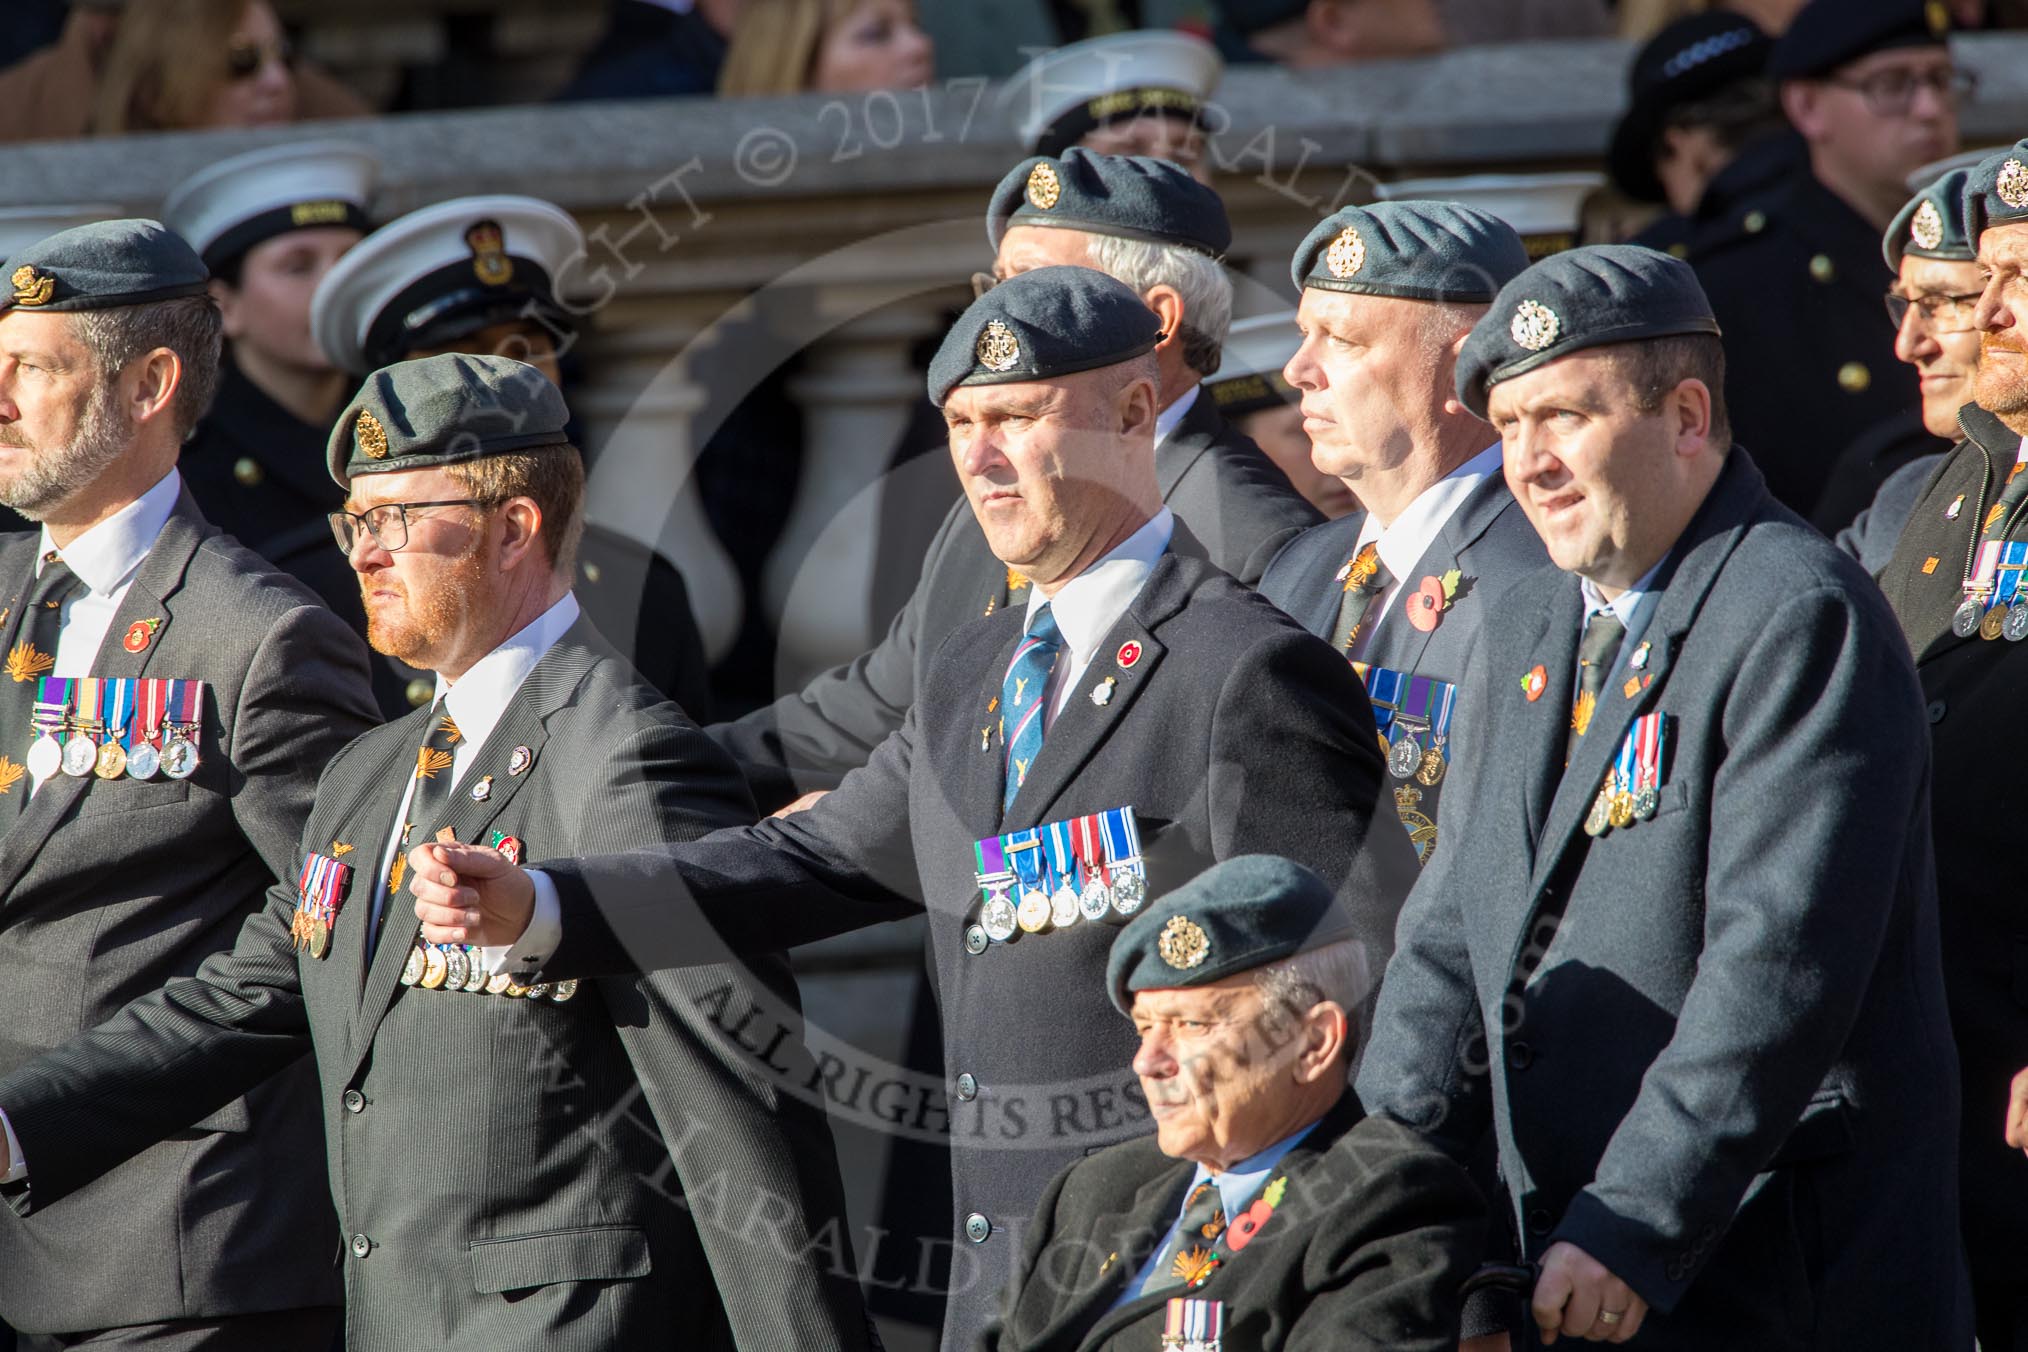 Royal Air Forces Association Armourers Branch (Group C26, 45 members) during the Royal British Legion March Past on Remembrance Sunday at the Cenotaph, Whitehall, Westminster, London, 11 November 2018, 12:18.